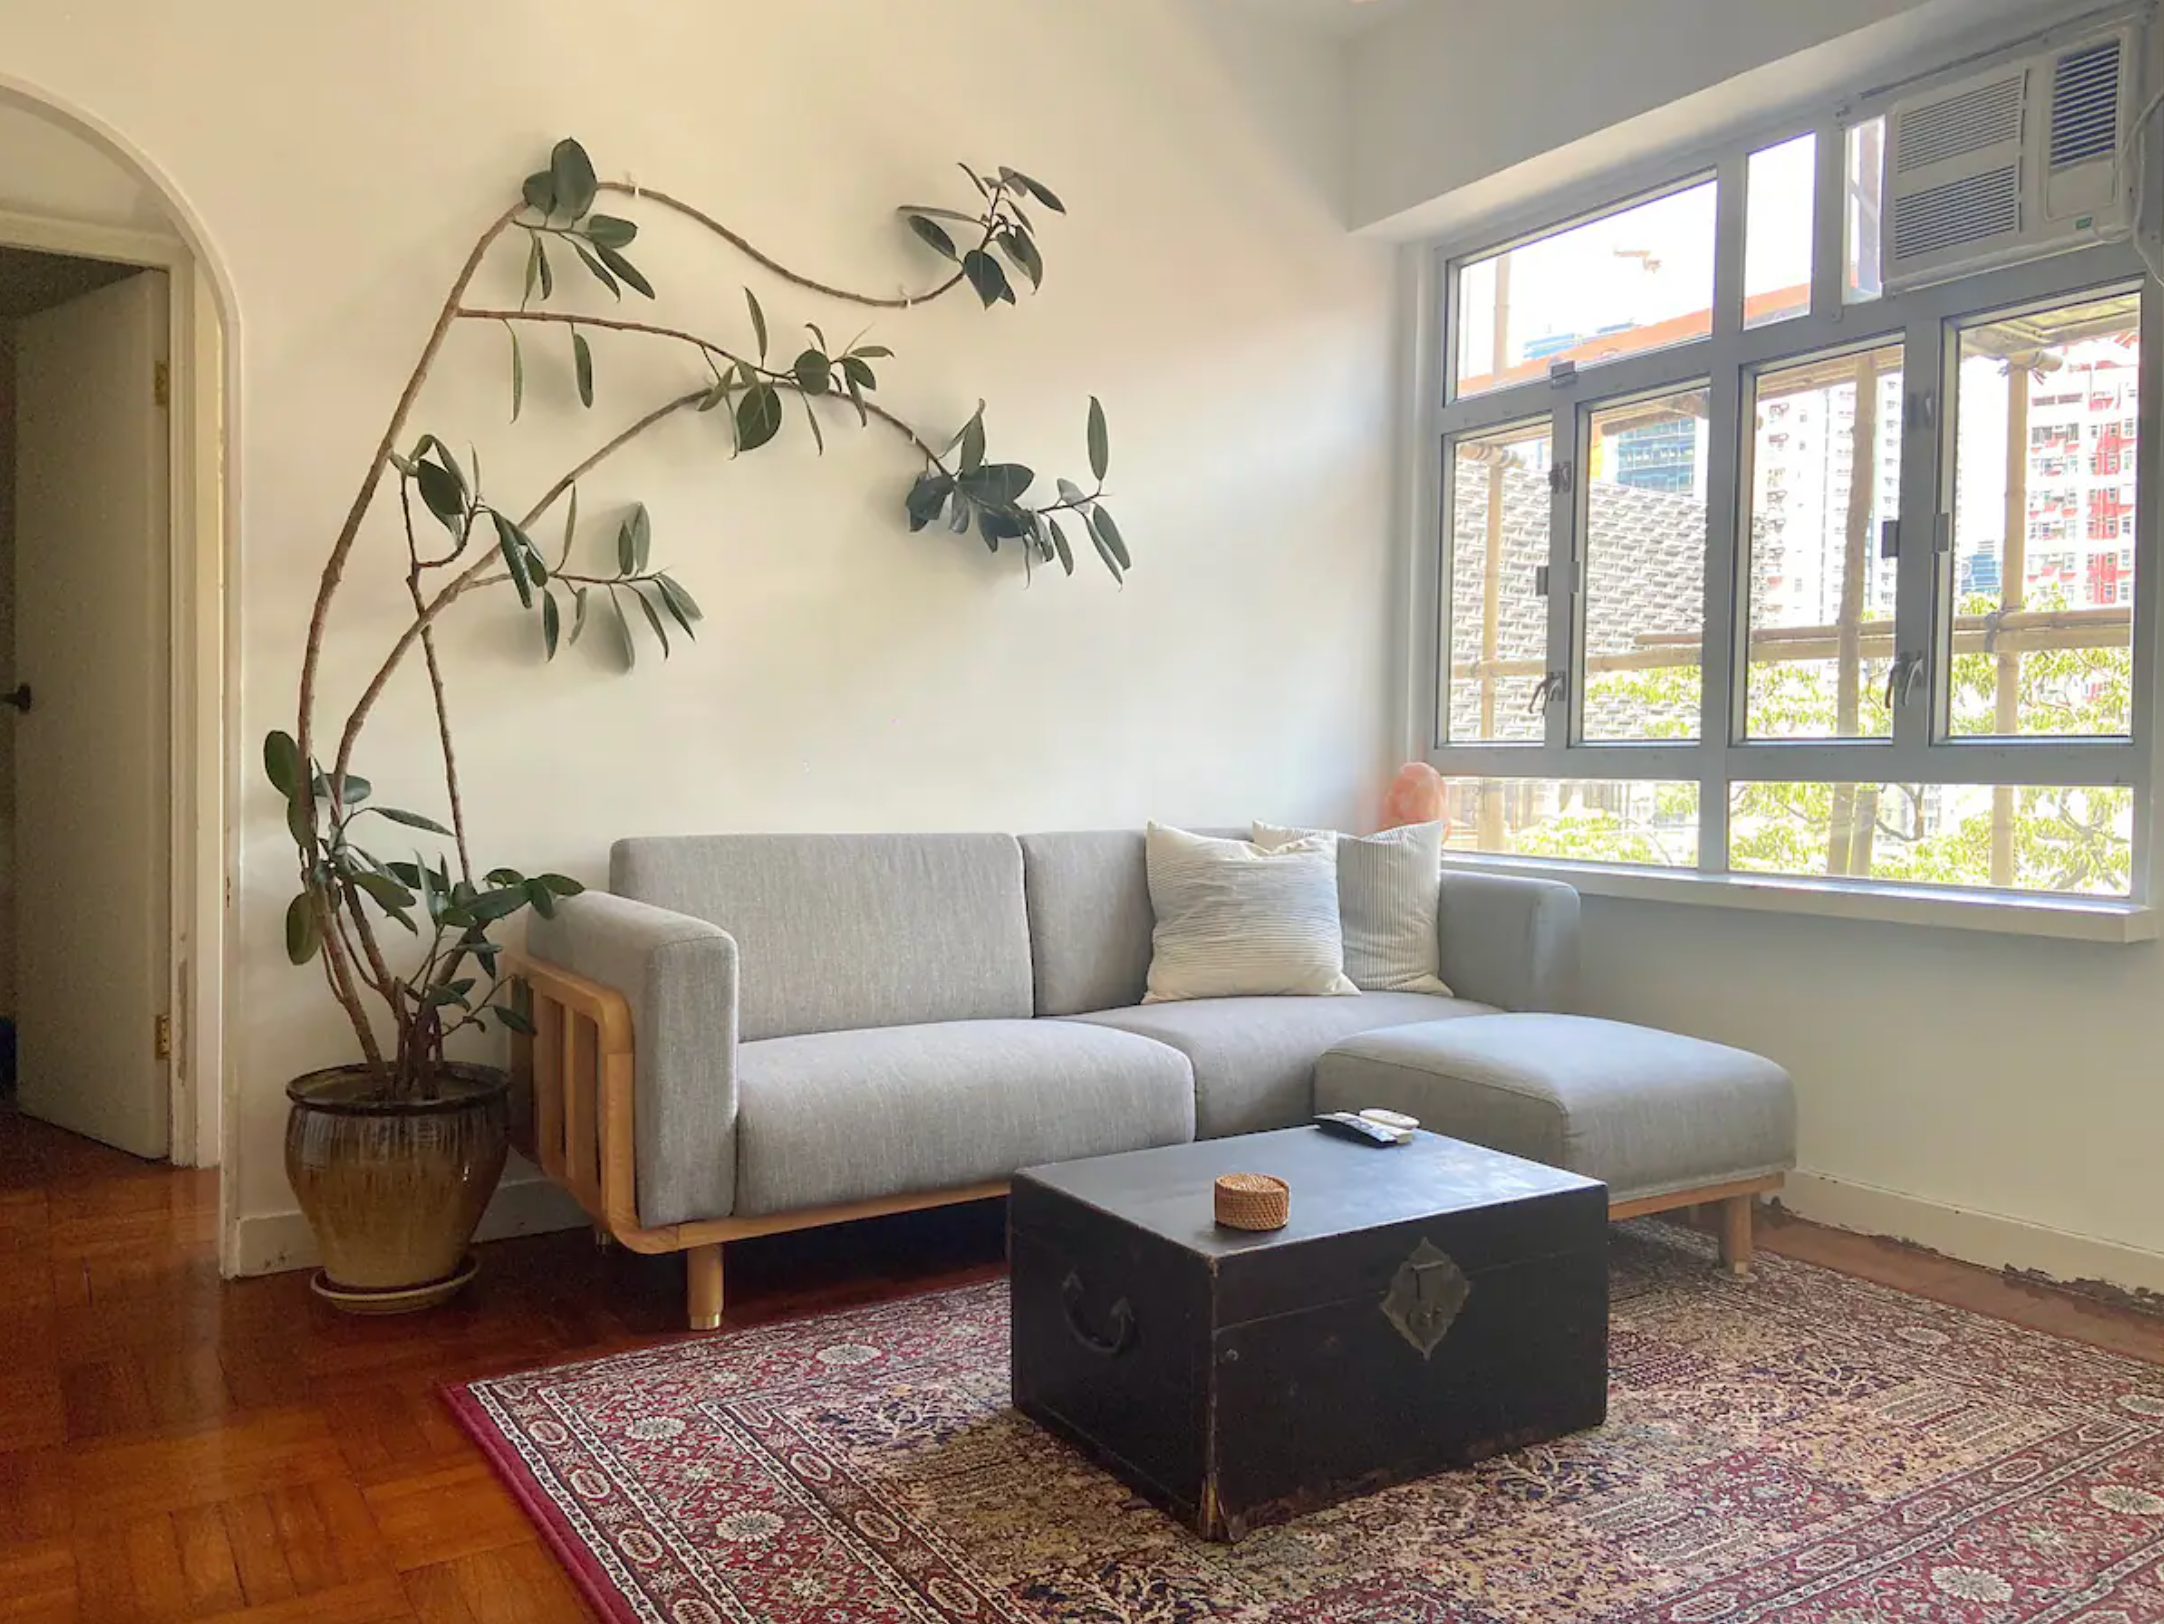 <p><strong>Bed & bath:</strong> 2 bedrooms, 1 bath<br> <strong>Top amenities:</strong> Views of Tai Kwun, traditional teaware, old-world charm</p> <p>Channel the Hong Kong of yesteryear in this nostalgic Airbnb in the heart of Soho. Enjoy breakfast with a view of Tai Kwun—a 19th-century police compound living its second life as an art, culture, and dining destination—before exploring the historic neighborhood, where antique shops along Hollywood Road, PMQ design center, and Man Mo Temple await. You’ll find great <a href="https://cntraveler.com/gallery/best-restaurants-in-hong-kong">restaurants</a> on every corner, plus a petit kitchen should you need to cook. While staying here, take advantage of the traditional Chinese tea set and workout gear in the living room. Note that there’s no elevator, so you’ll need to carry your luggage up several flights of stairs.</p> $192, Airbnb (starting price). <a href="https://www.airbnb.com/rooms/989439373557647500">Get it now!</a><p>Sign up to receive the latest news, expert tips, and inspiration on all things travel</p><a href="https://www.cntraveler.com/newsletter/the-daily?sourceCode=msnsend">Inspire Me</a>